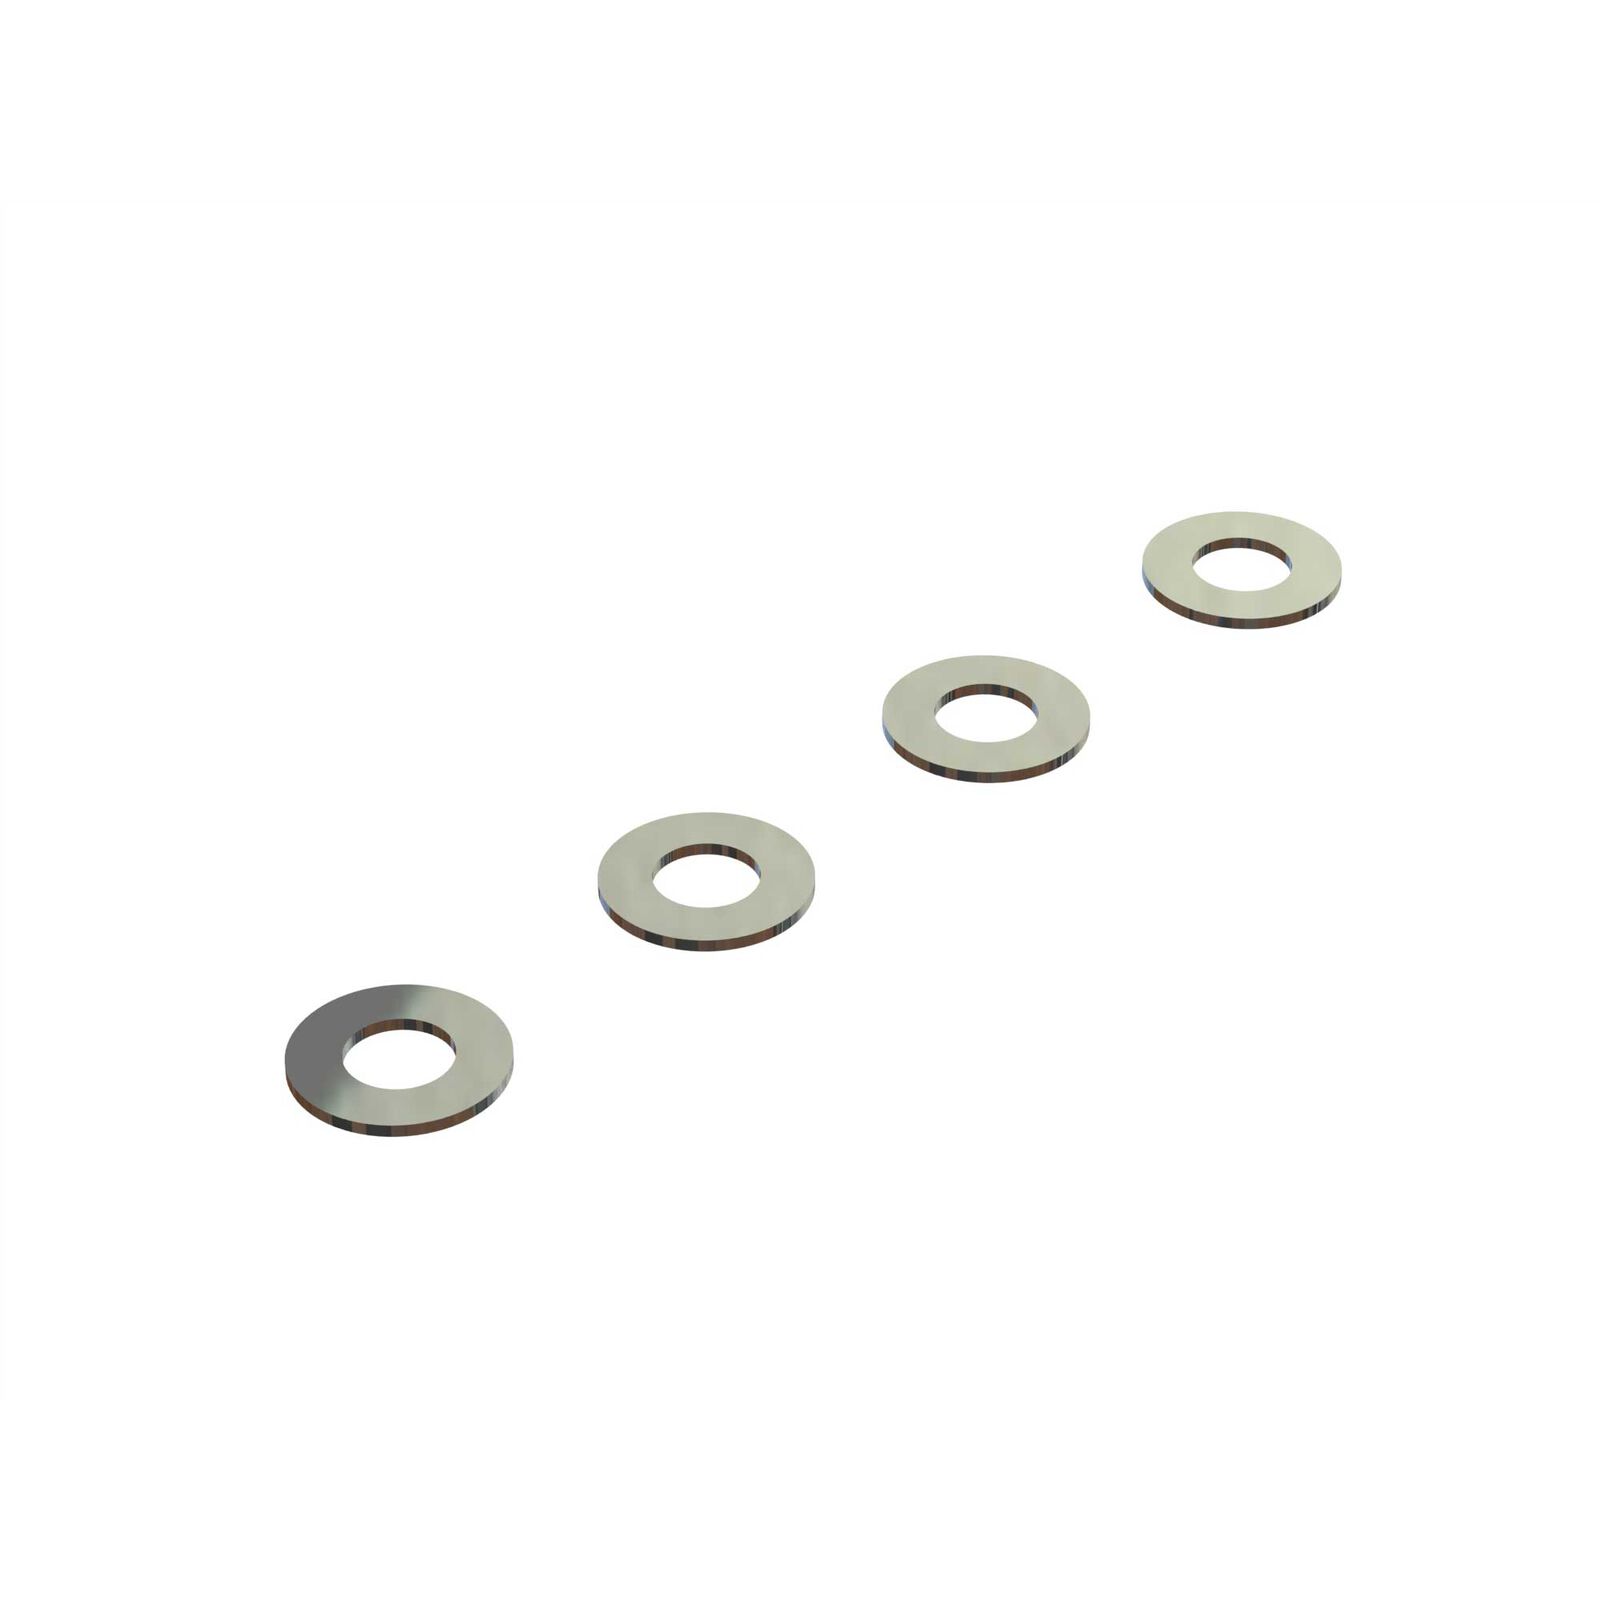 Washer, 8x16x1mm (4)